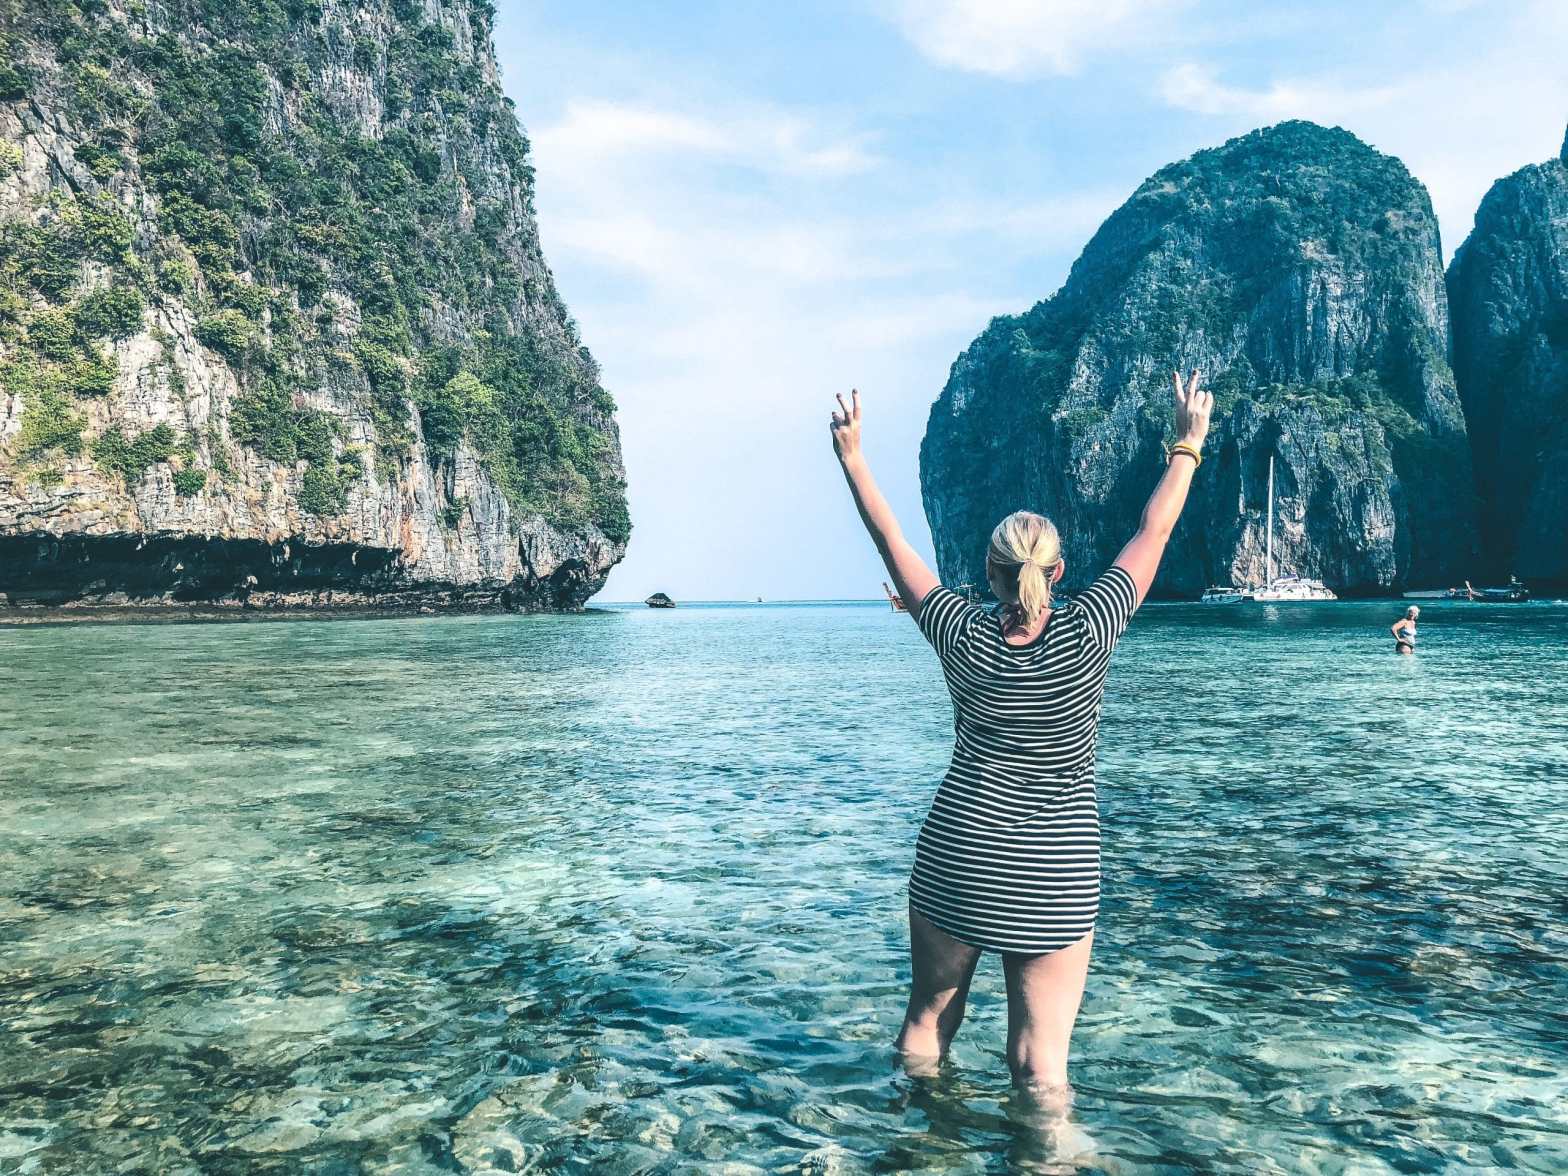 Woman standing in Maya Bay, looking out to the entrance, holding peace signs in the air